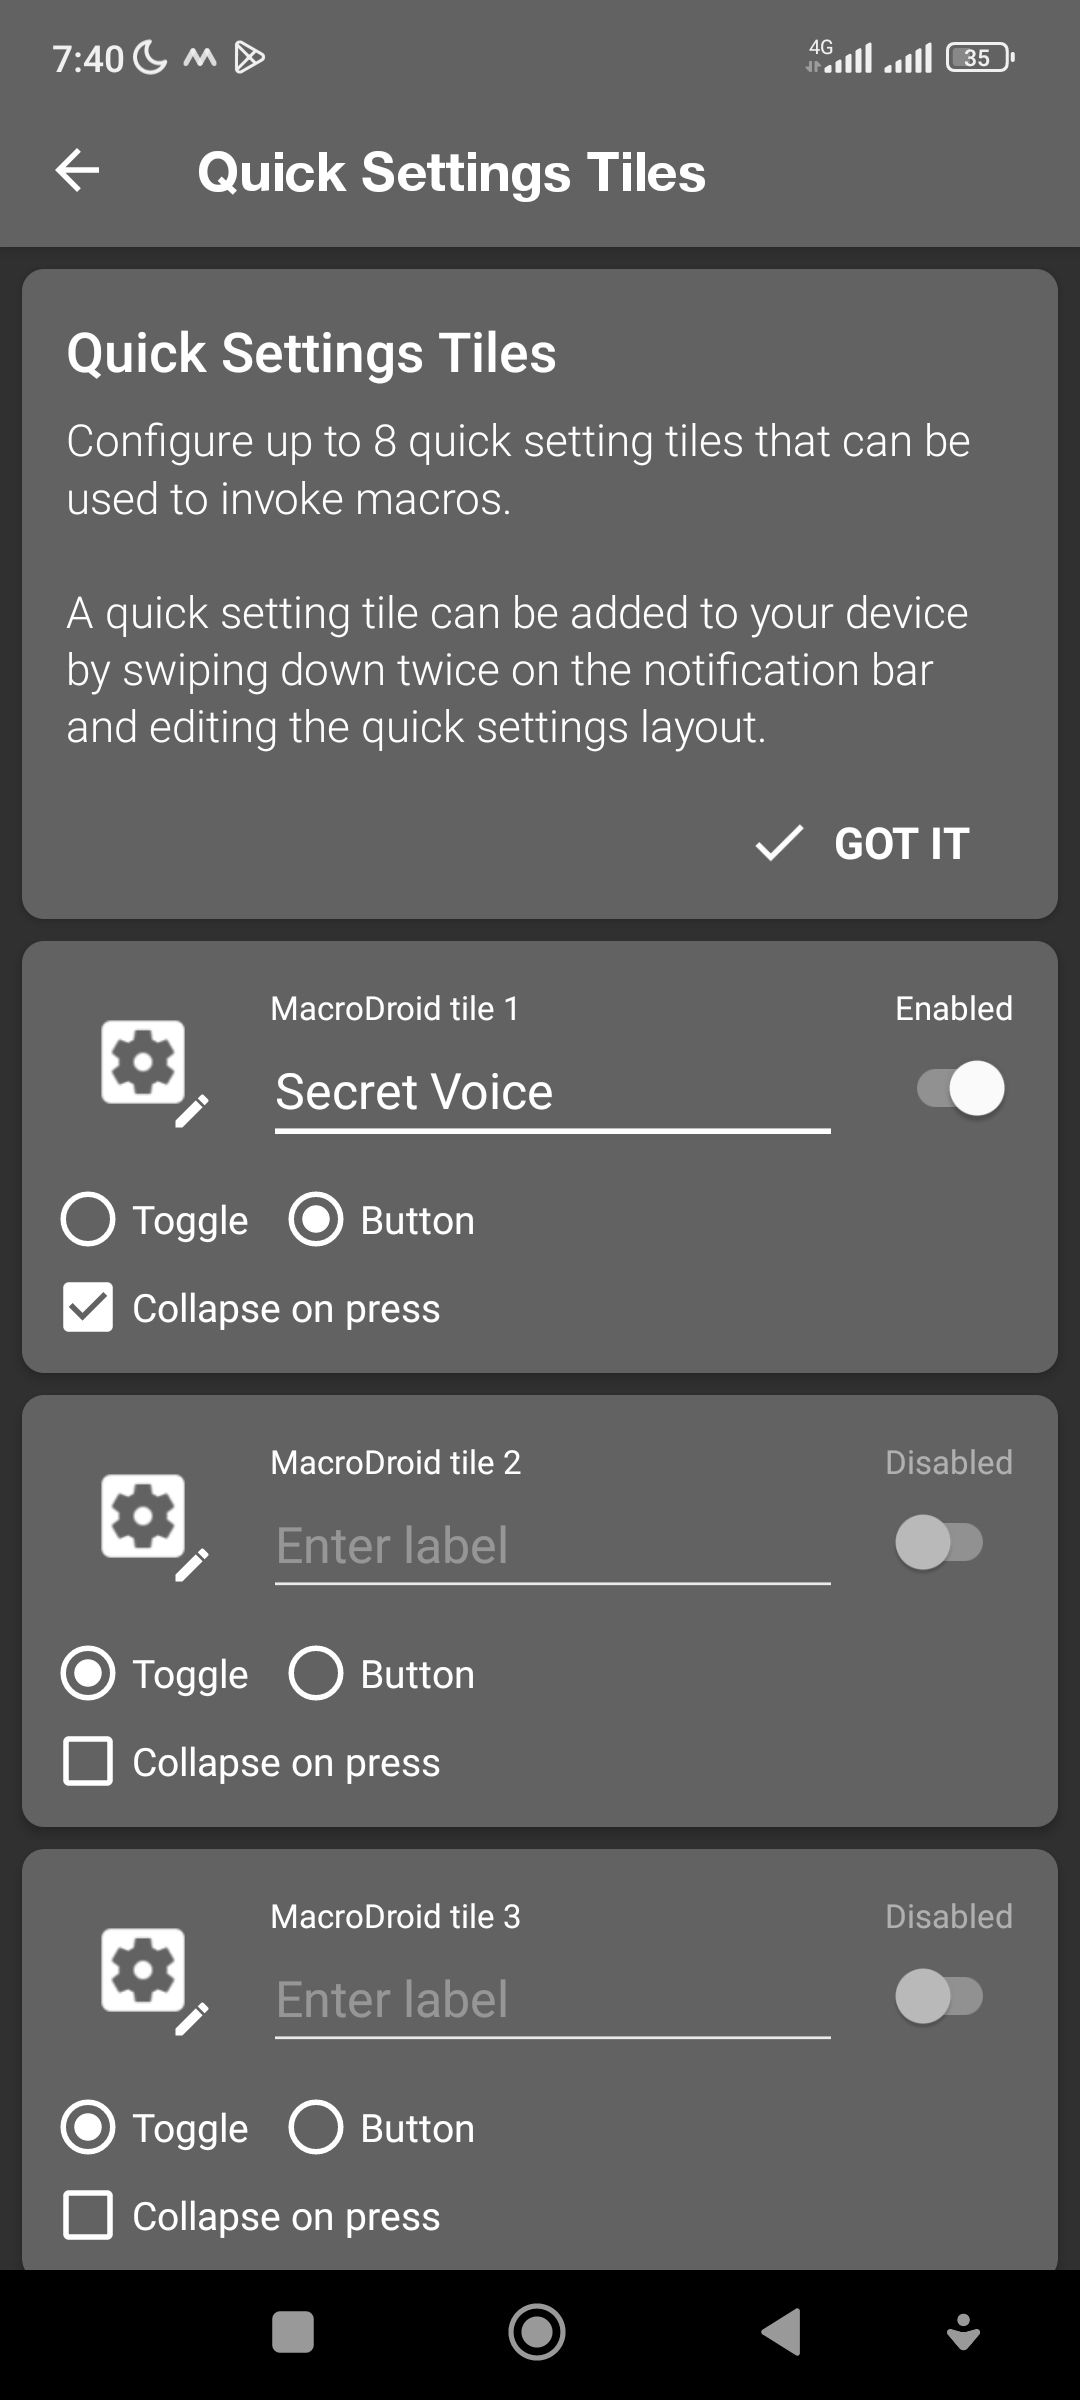 Configuring a quick settings tile on Android